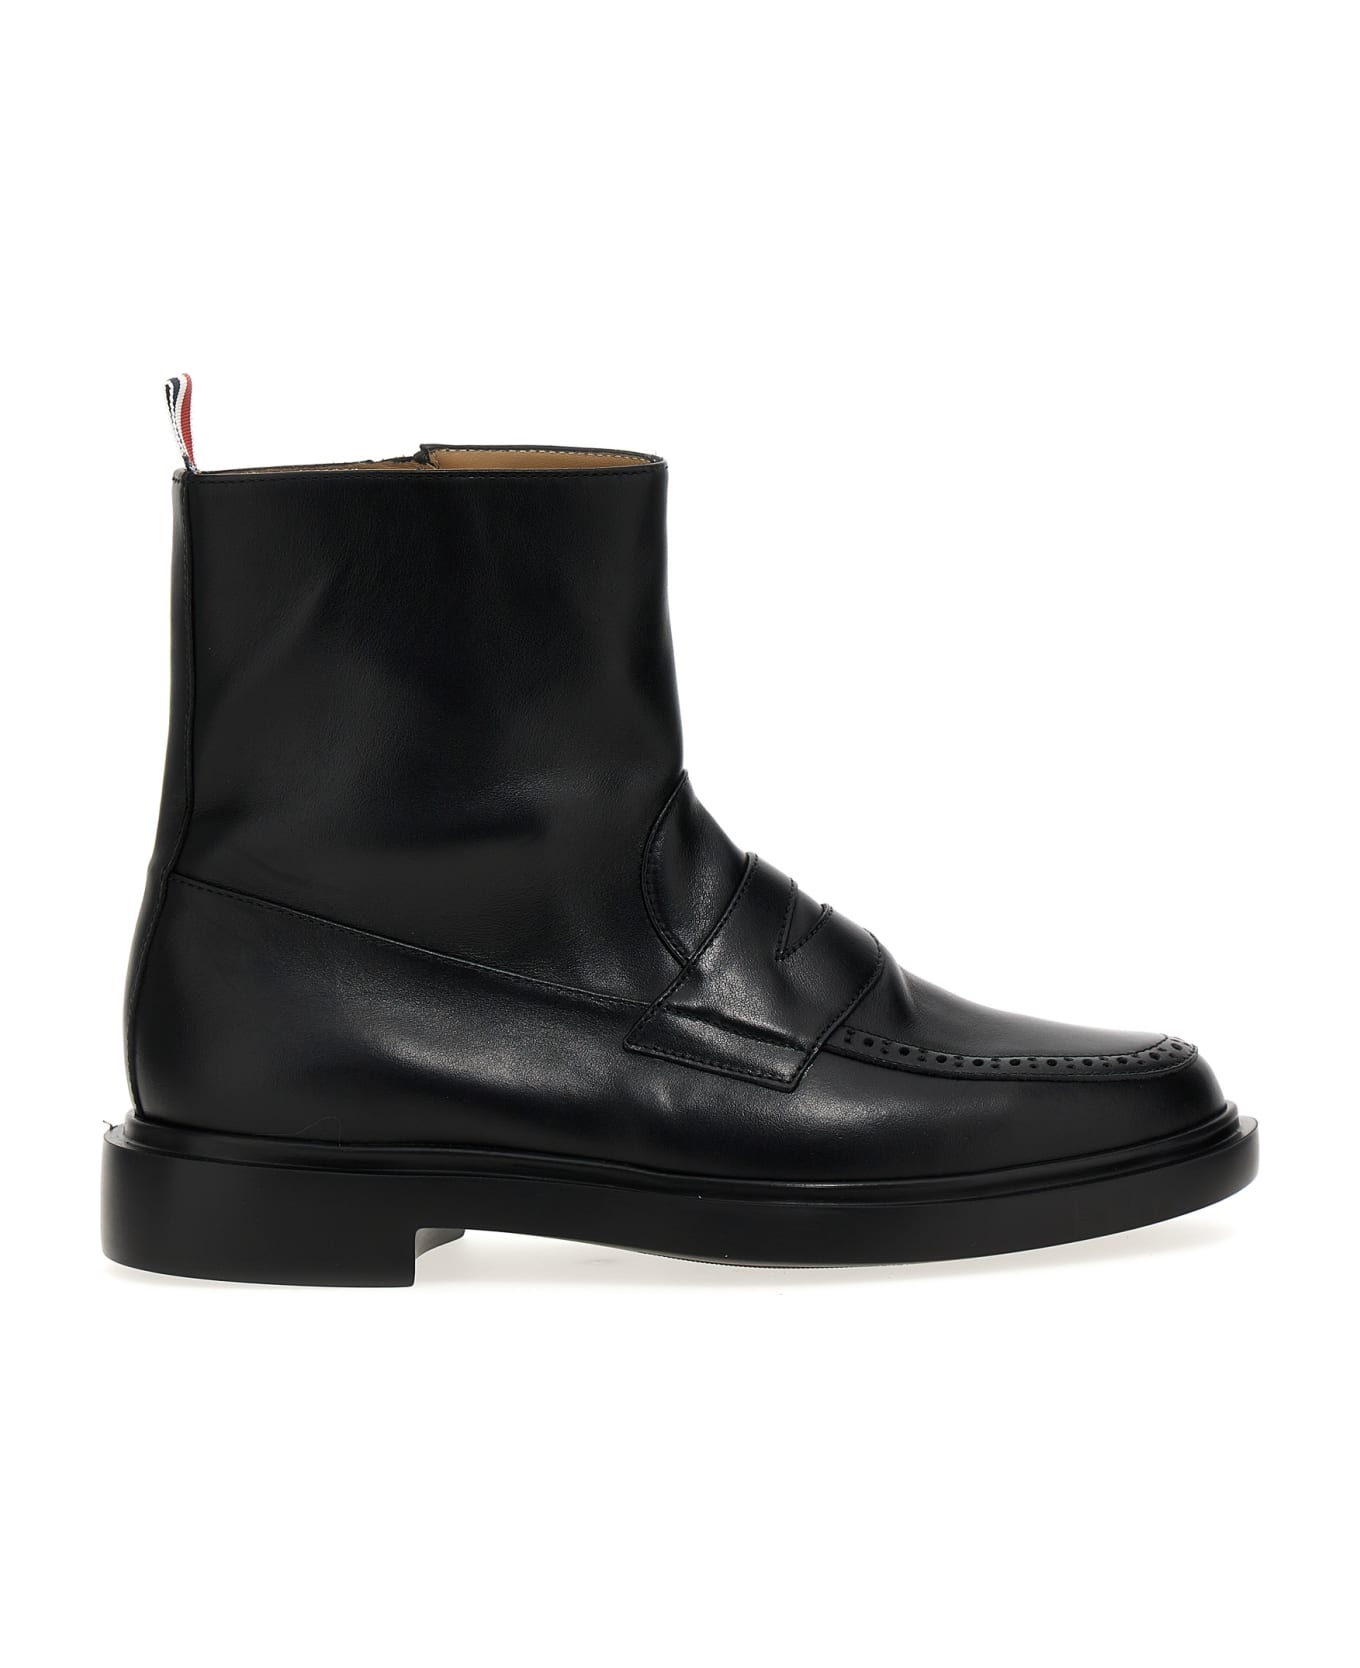 Thom Browne 'penny Loafer' Ankle Boots - Black ブーツ